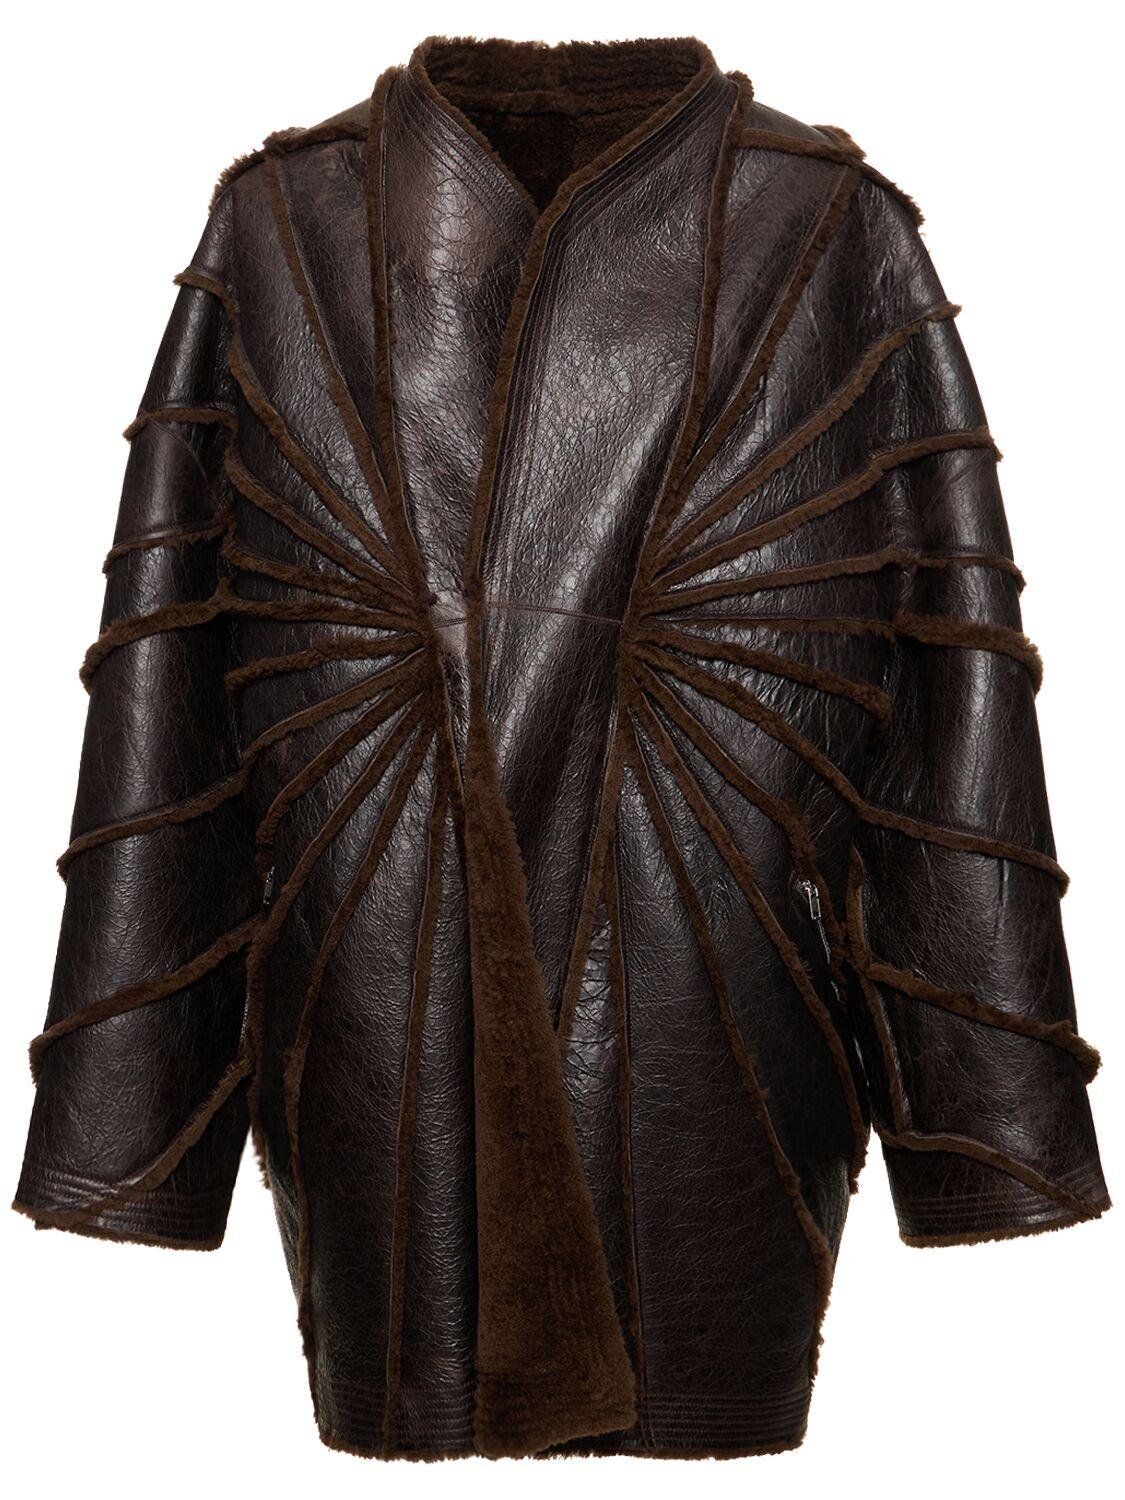 Reversible Shearling & Leather Overcoat by RICK OWENS